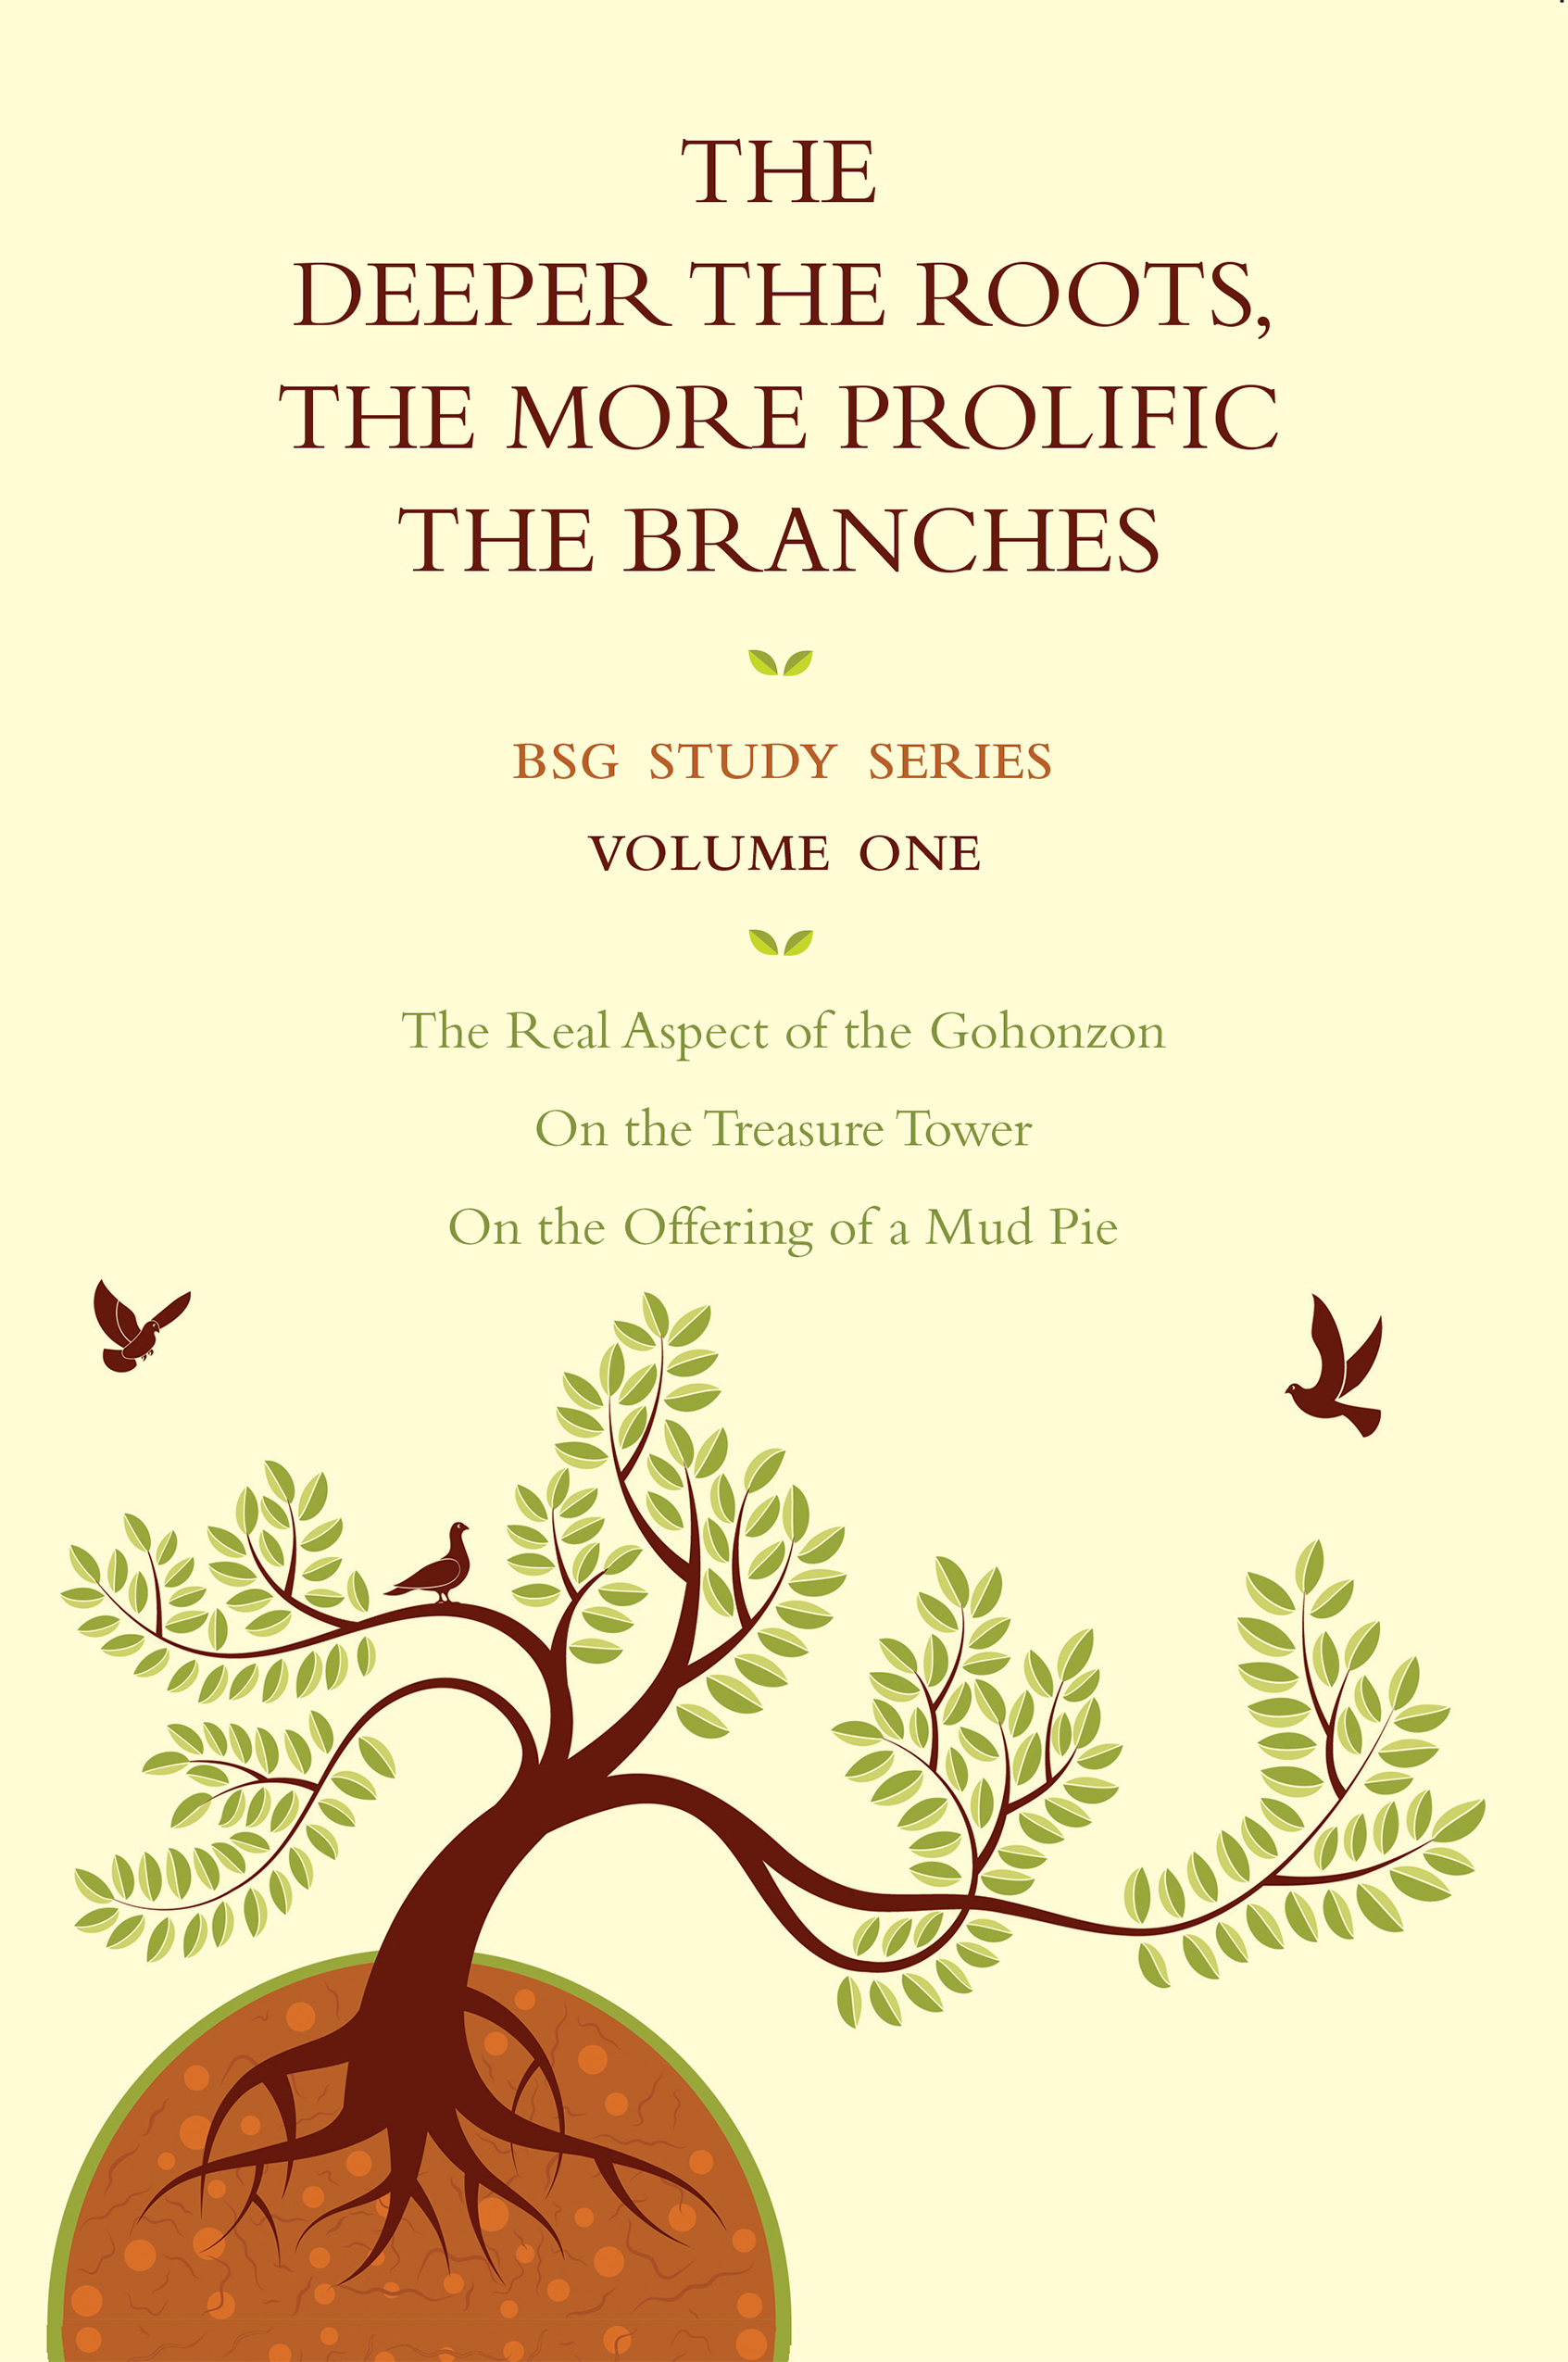 THE DEEPER THE ROOTS, THE MORE PROLIFIC THE BRANCHES Vol 1